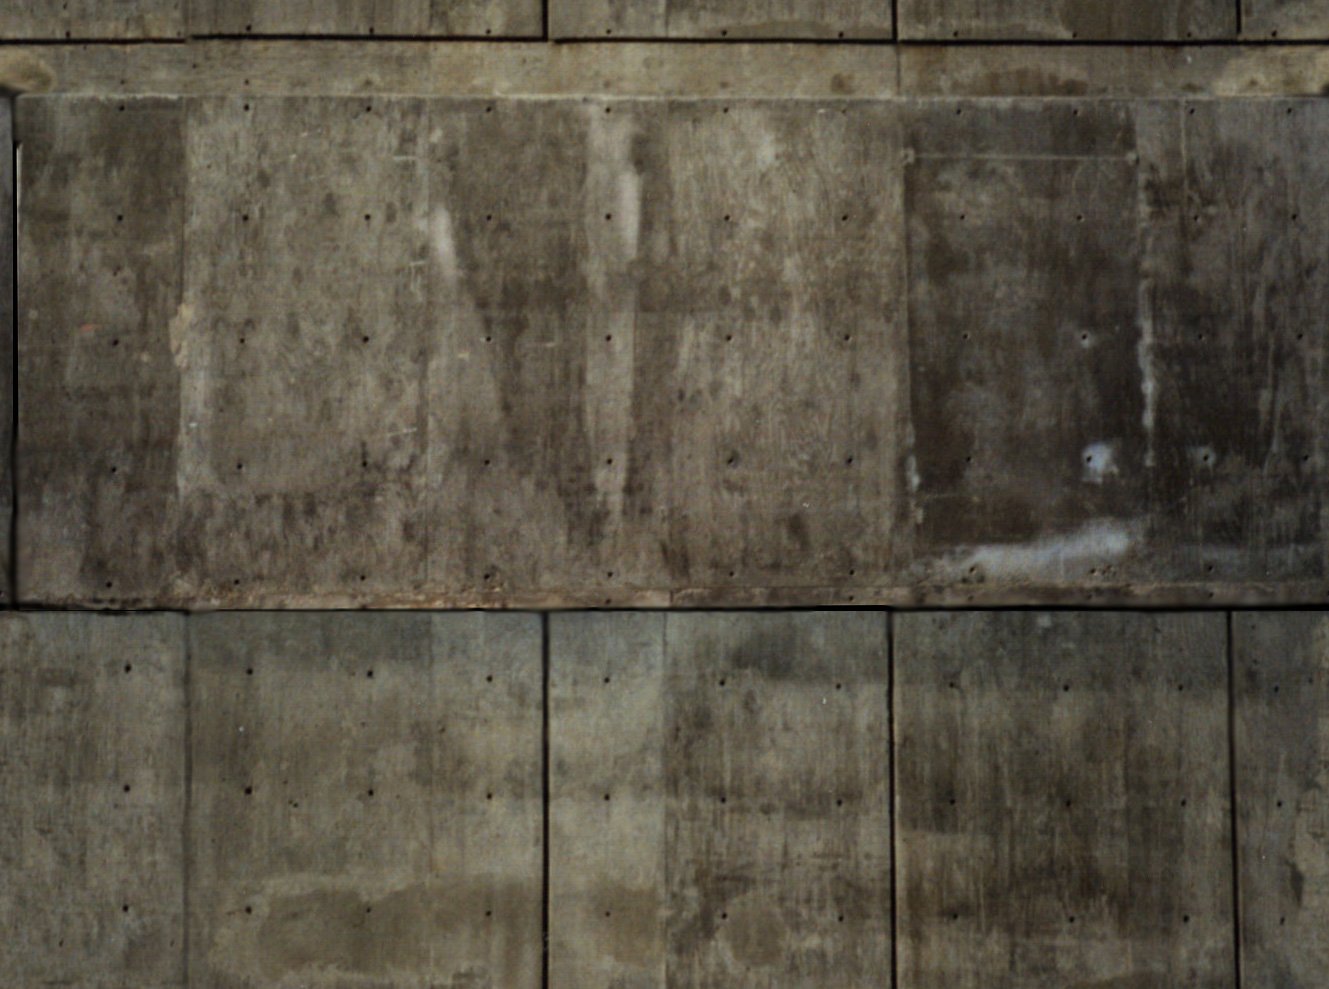 textures/library/wood/ConcreteWall.JPG